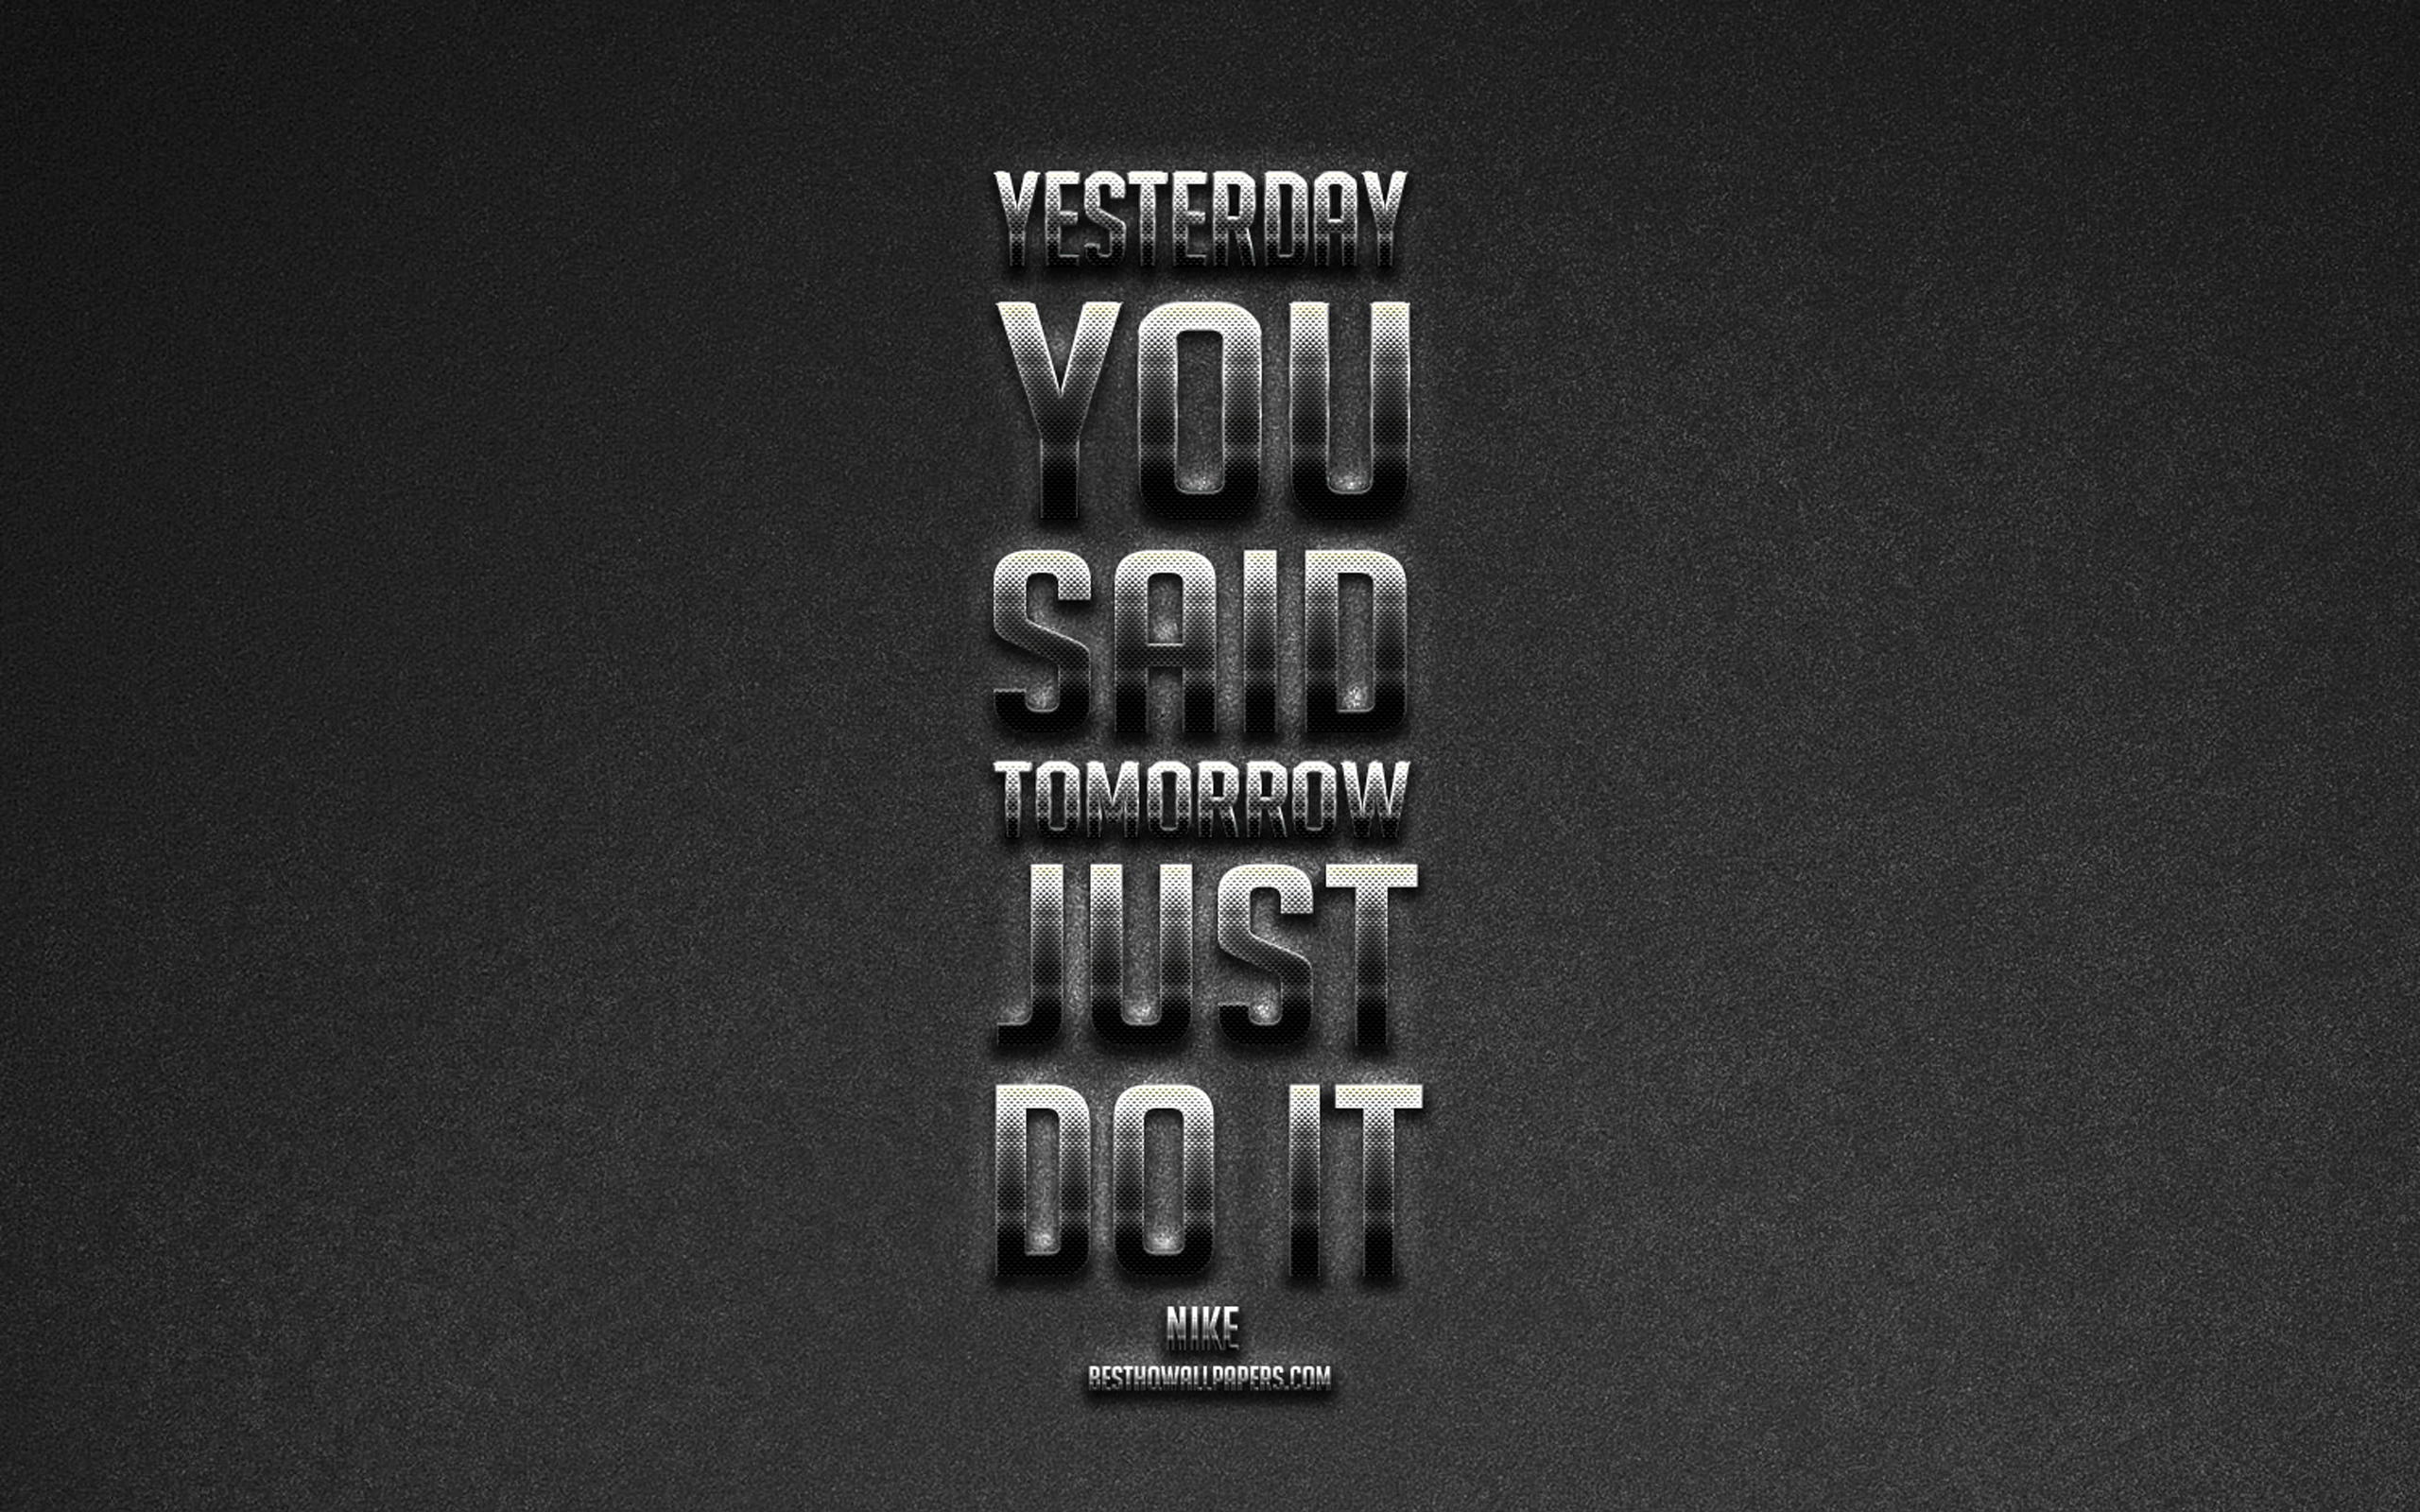 just do it quotes wallpaper